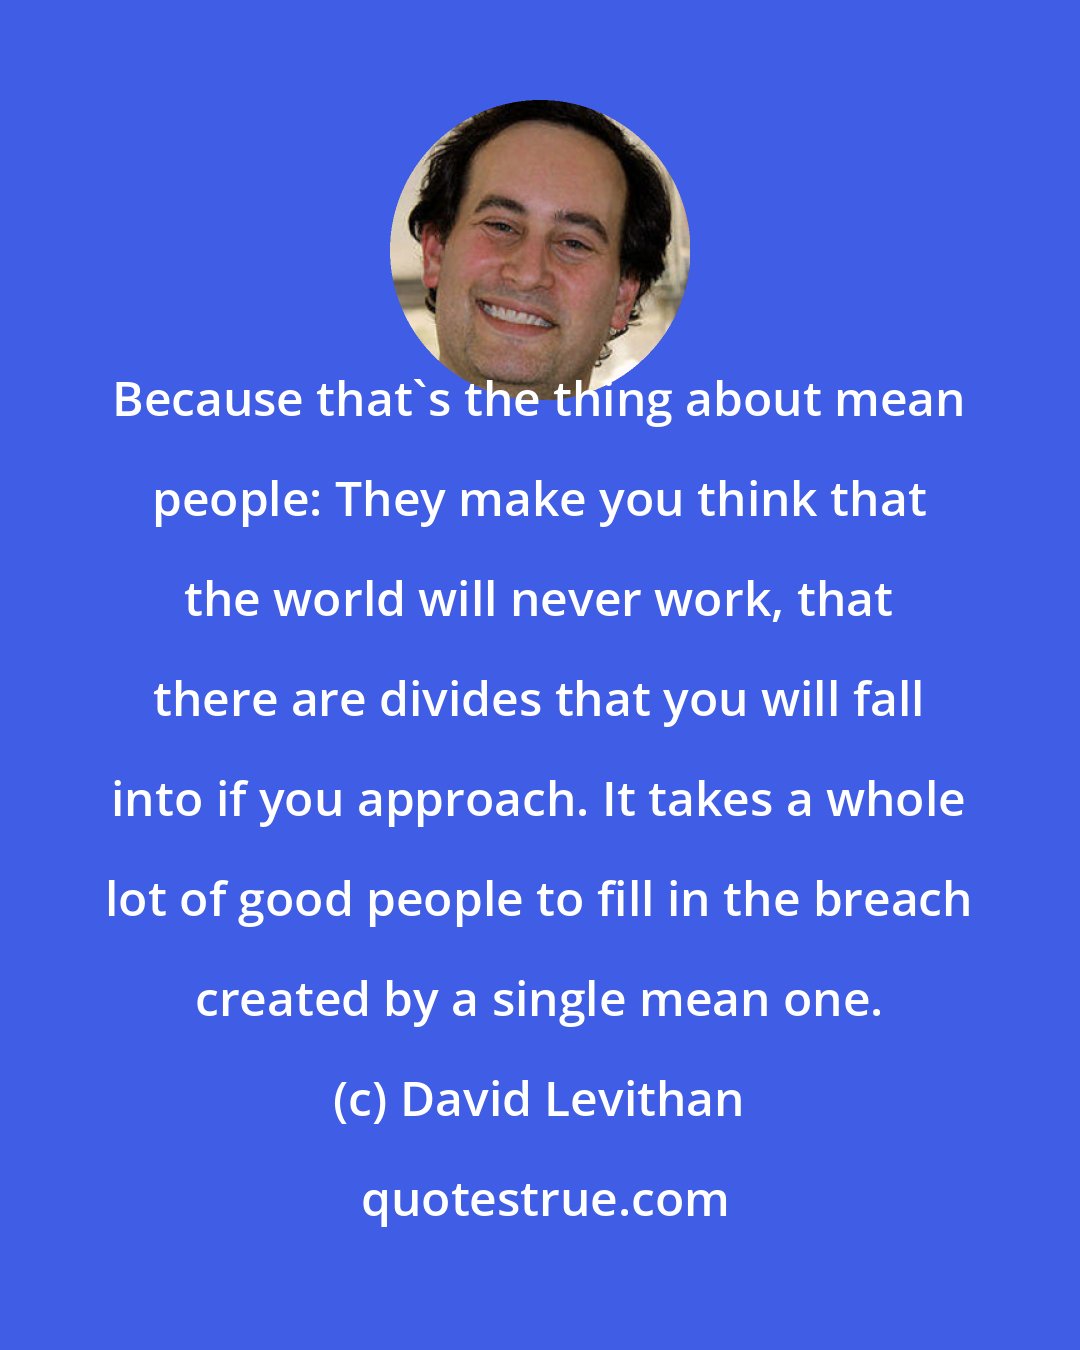 David Levithan: Because that's the thing about mean people: They make you think that the world will never work, that there are divides that you will fall into if you approach. It takes a whole lot of good people to fill in the breach created by a single mean one.